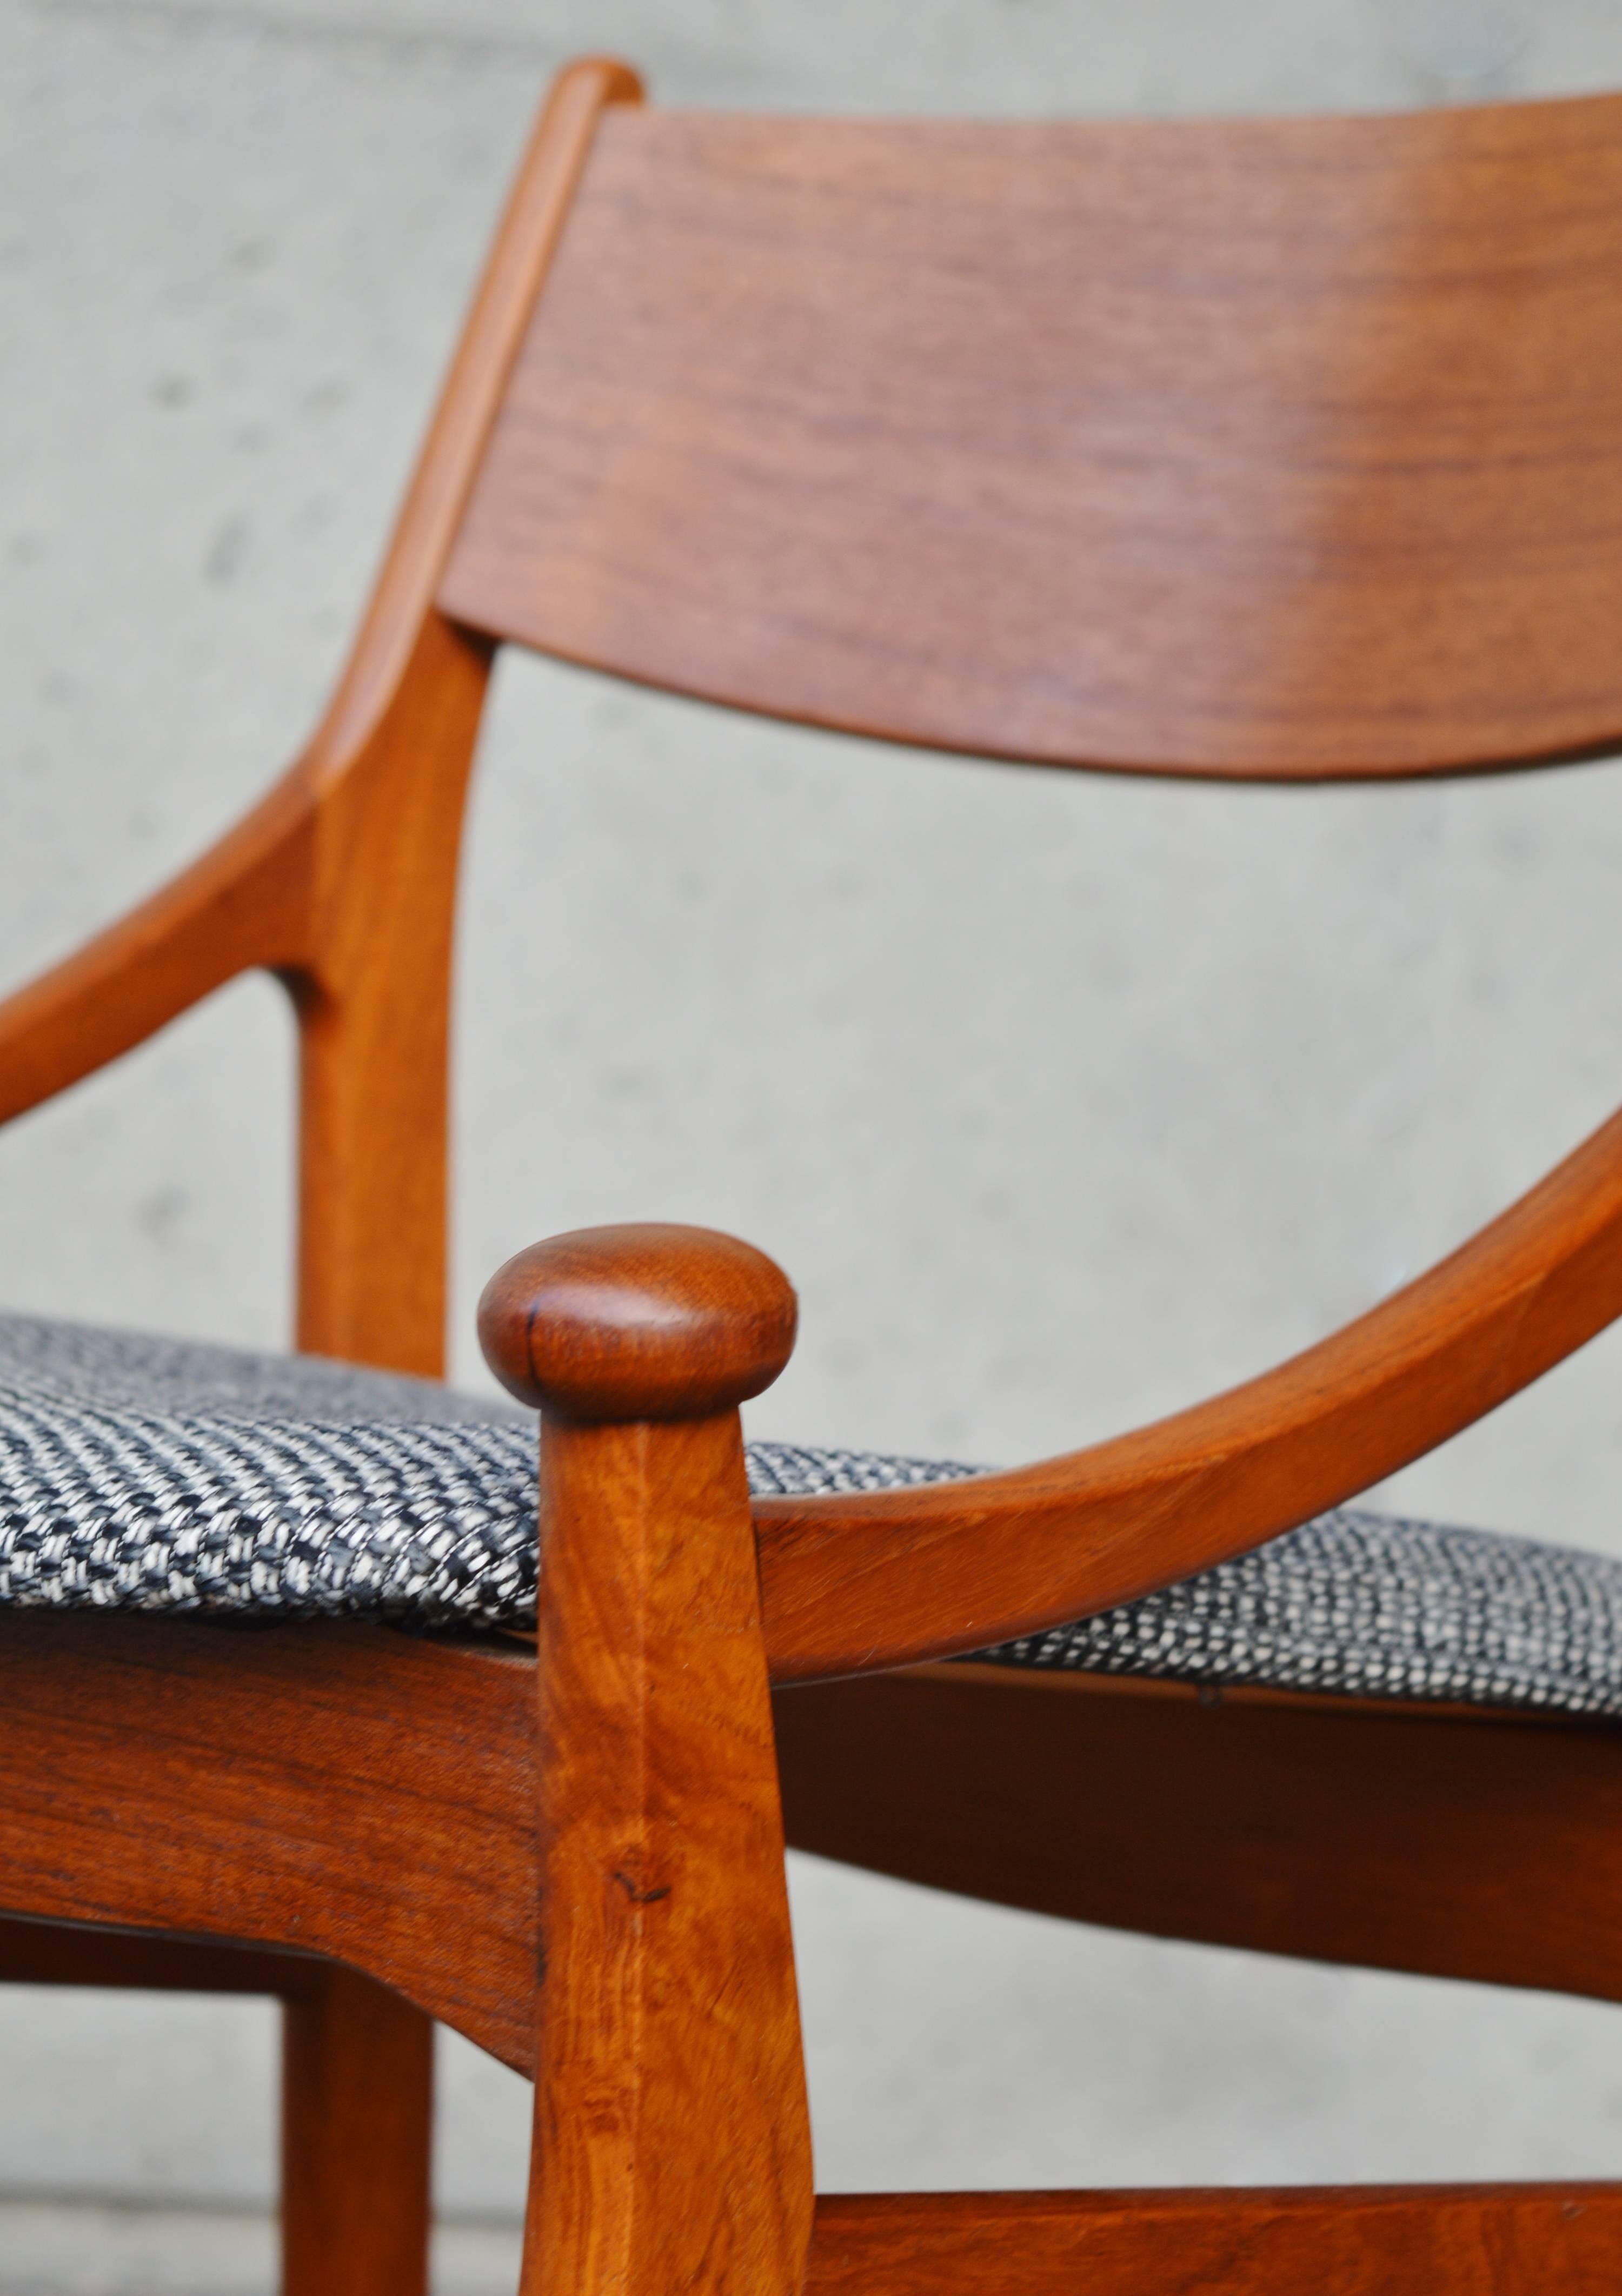 These amazingly elegant and stylish Danish modern teak model BT dining chairs are seldom seen and a unique quality design by Vestervig Eriksen for Brdr. Tromborg, Denmark. Highlighted by the curved knobs that sit atop each front leg, and a gently